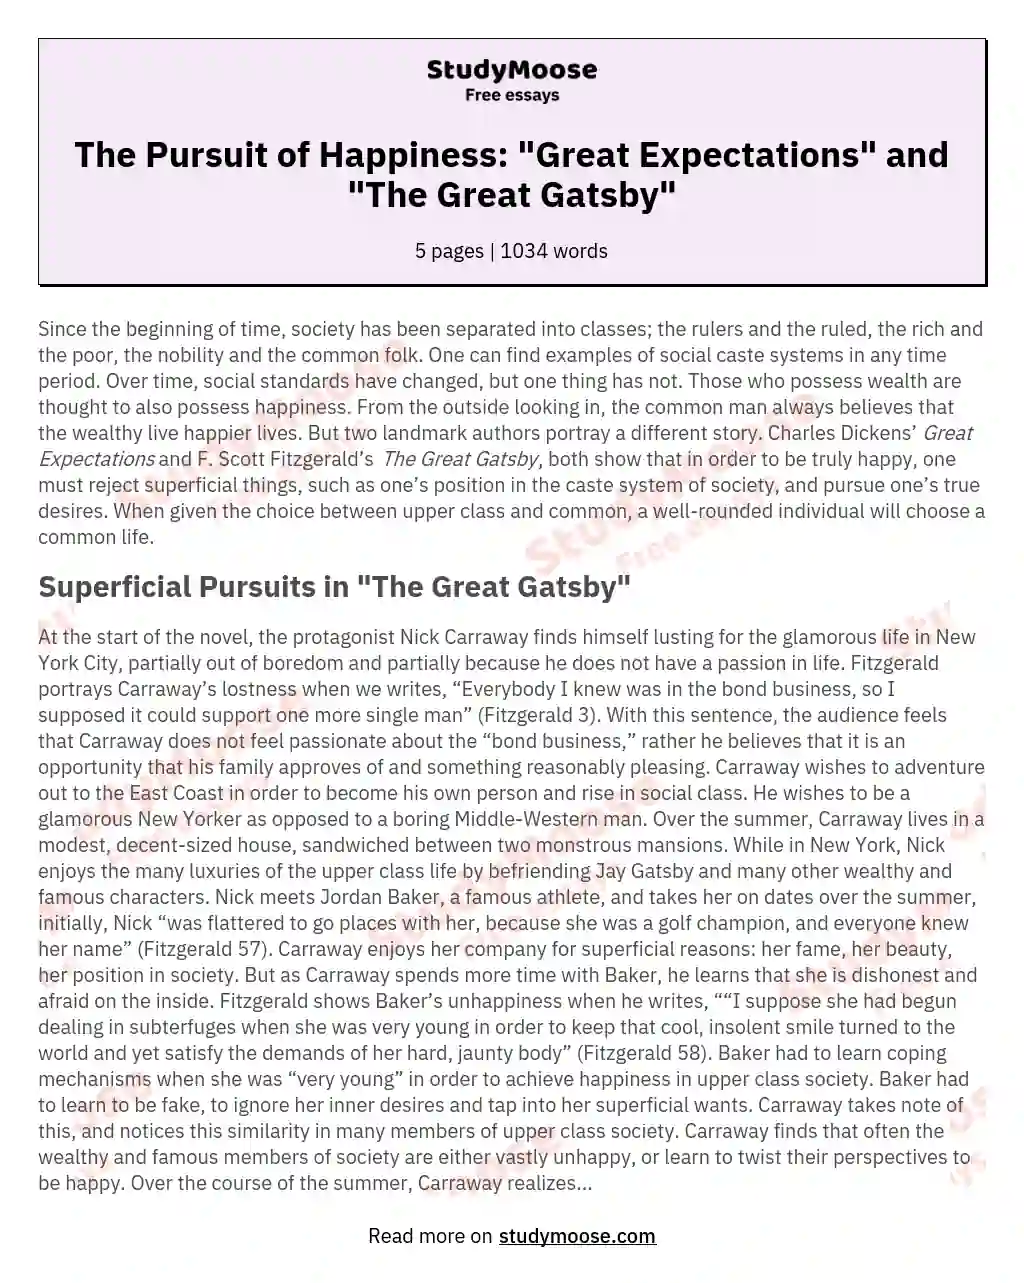 The Great Gatsby and Great Expectations: A Comparison